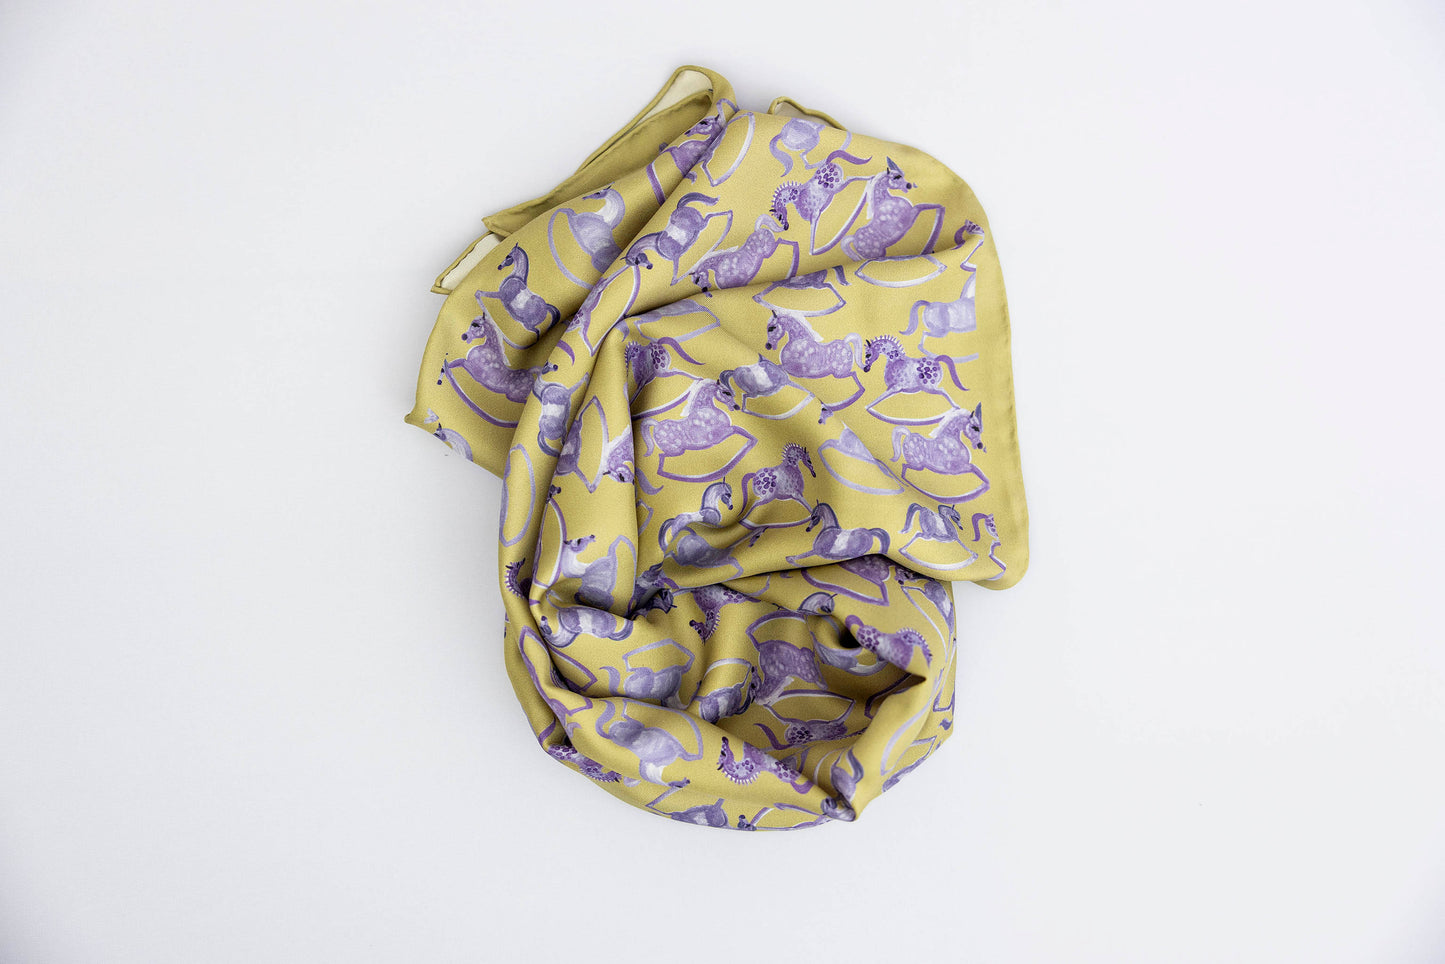 Stampede Twill Scarf - Lilac on Mustard